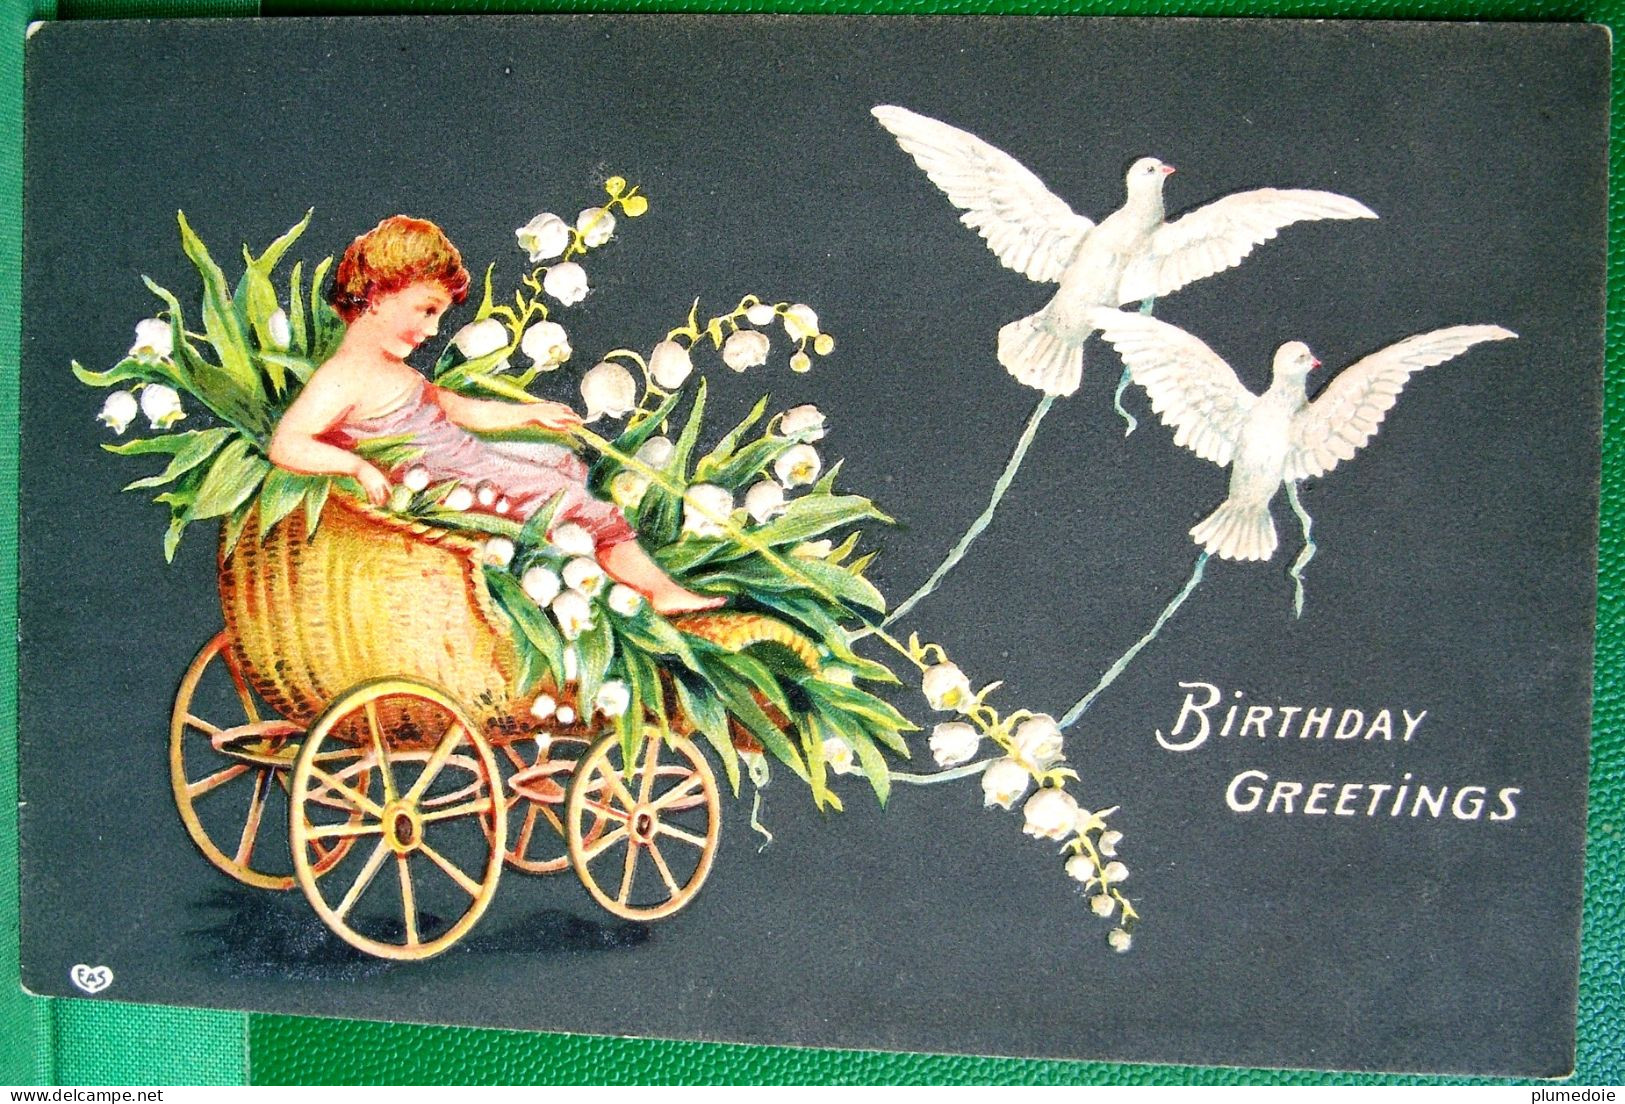 Cpa Gaufree CHAR DE MUGUET CHERUBIN COLOMBE FLEURS 1911, LILY OF THE VALLEY DOVE CART CHILD Embossed  OLD EAS PC - Anges